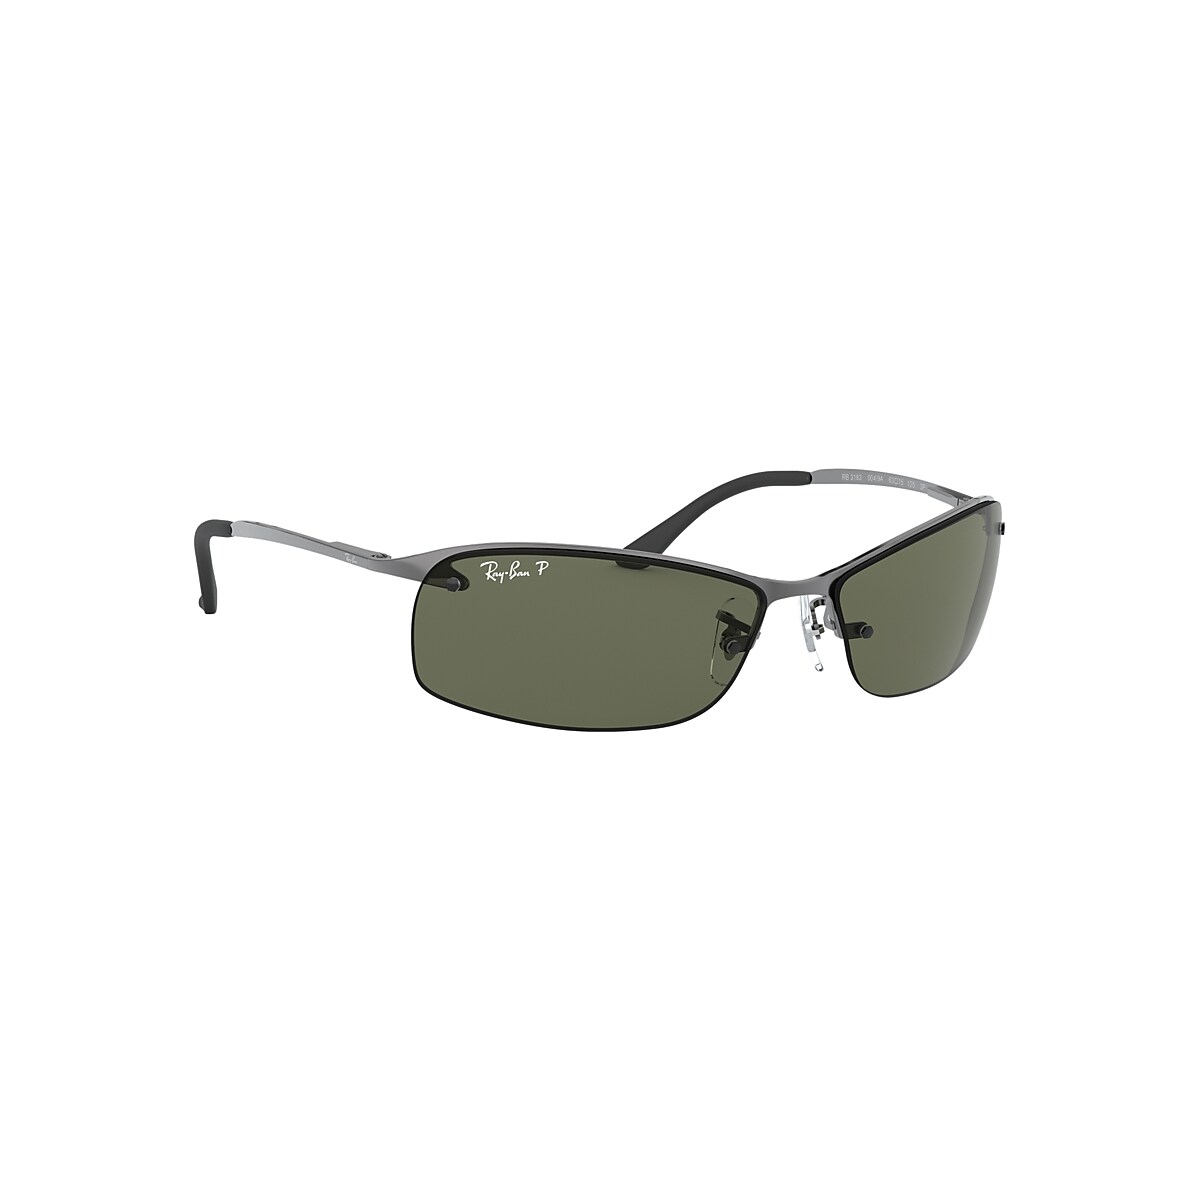 Rb3183 Sunglasses in Gunmetal and Green | Ray-Ban®